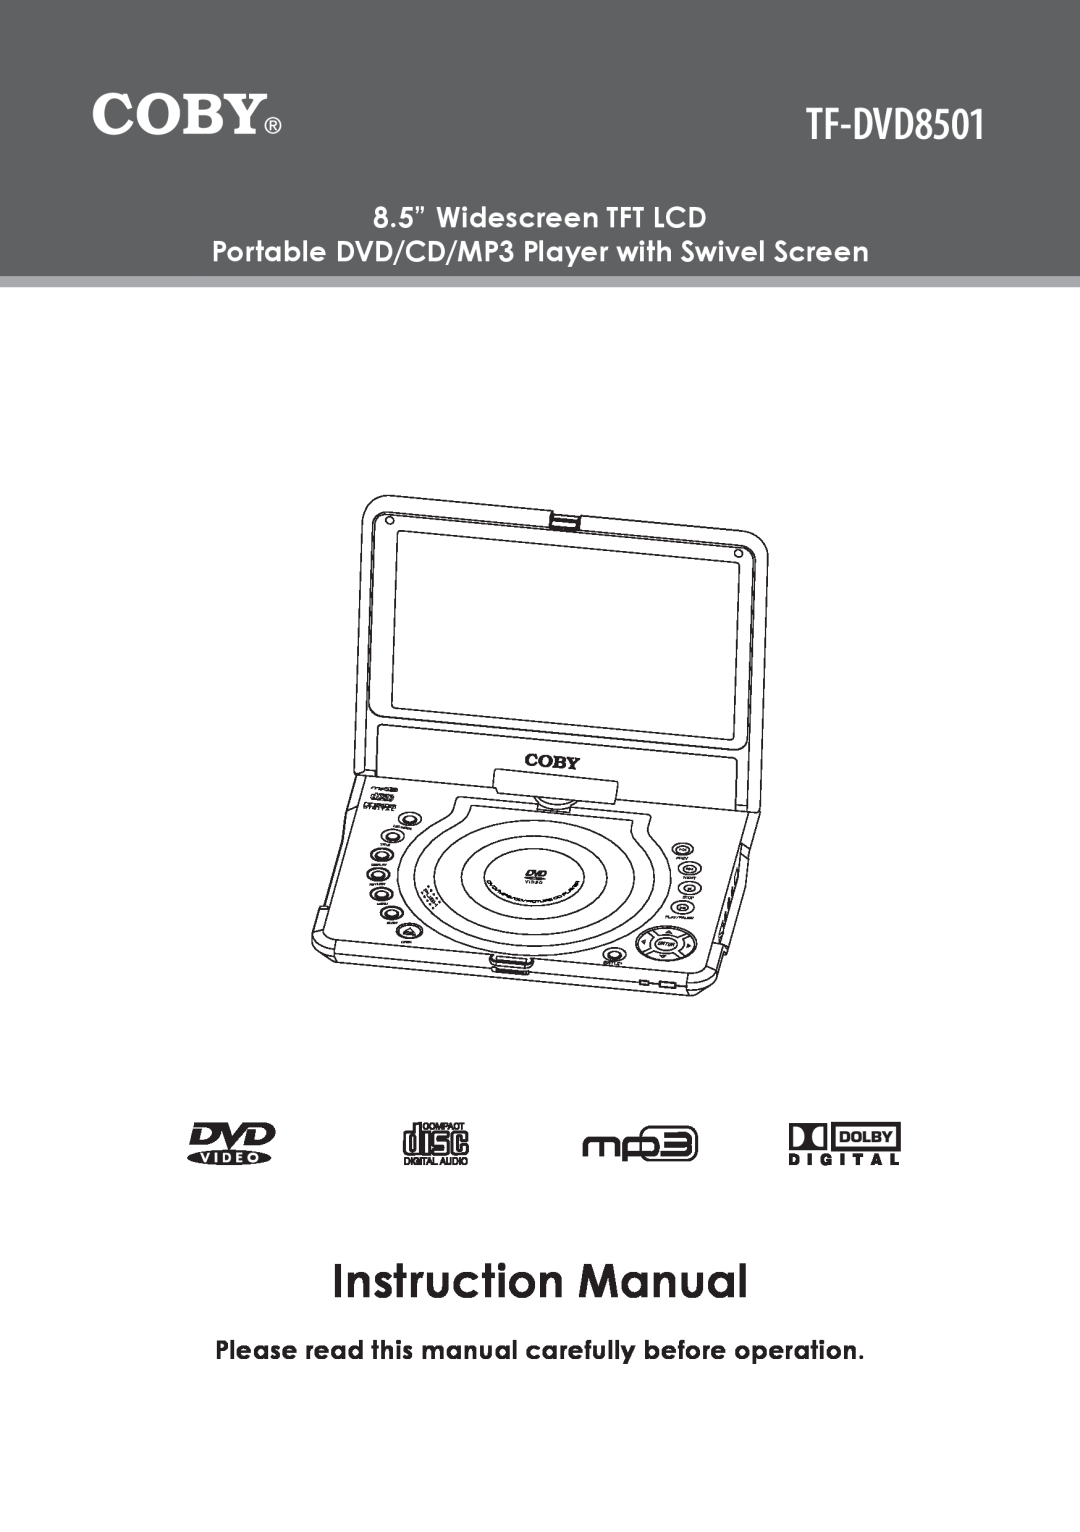 COBY electronic TF-DVD8501 instruction manual Portable8.5”WidescreenMP3 Micro SystemTFT LCDwith, Instruction Manual 